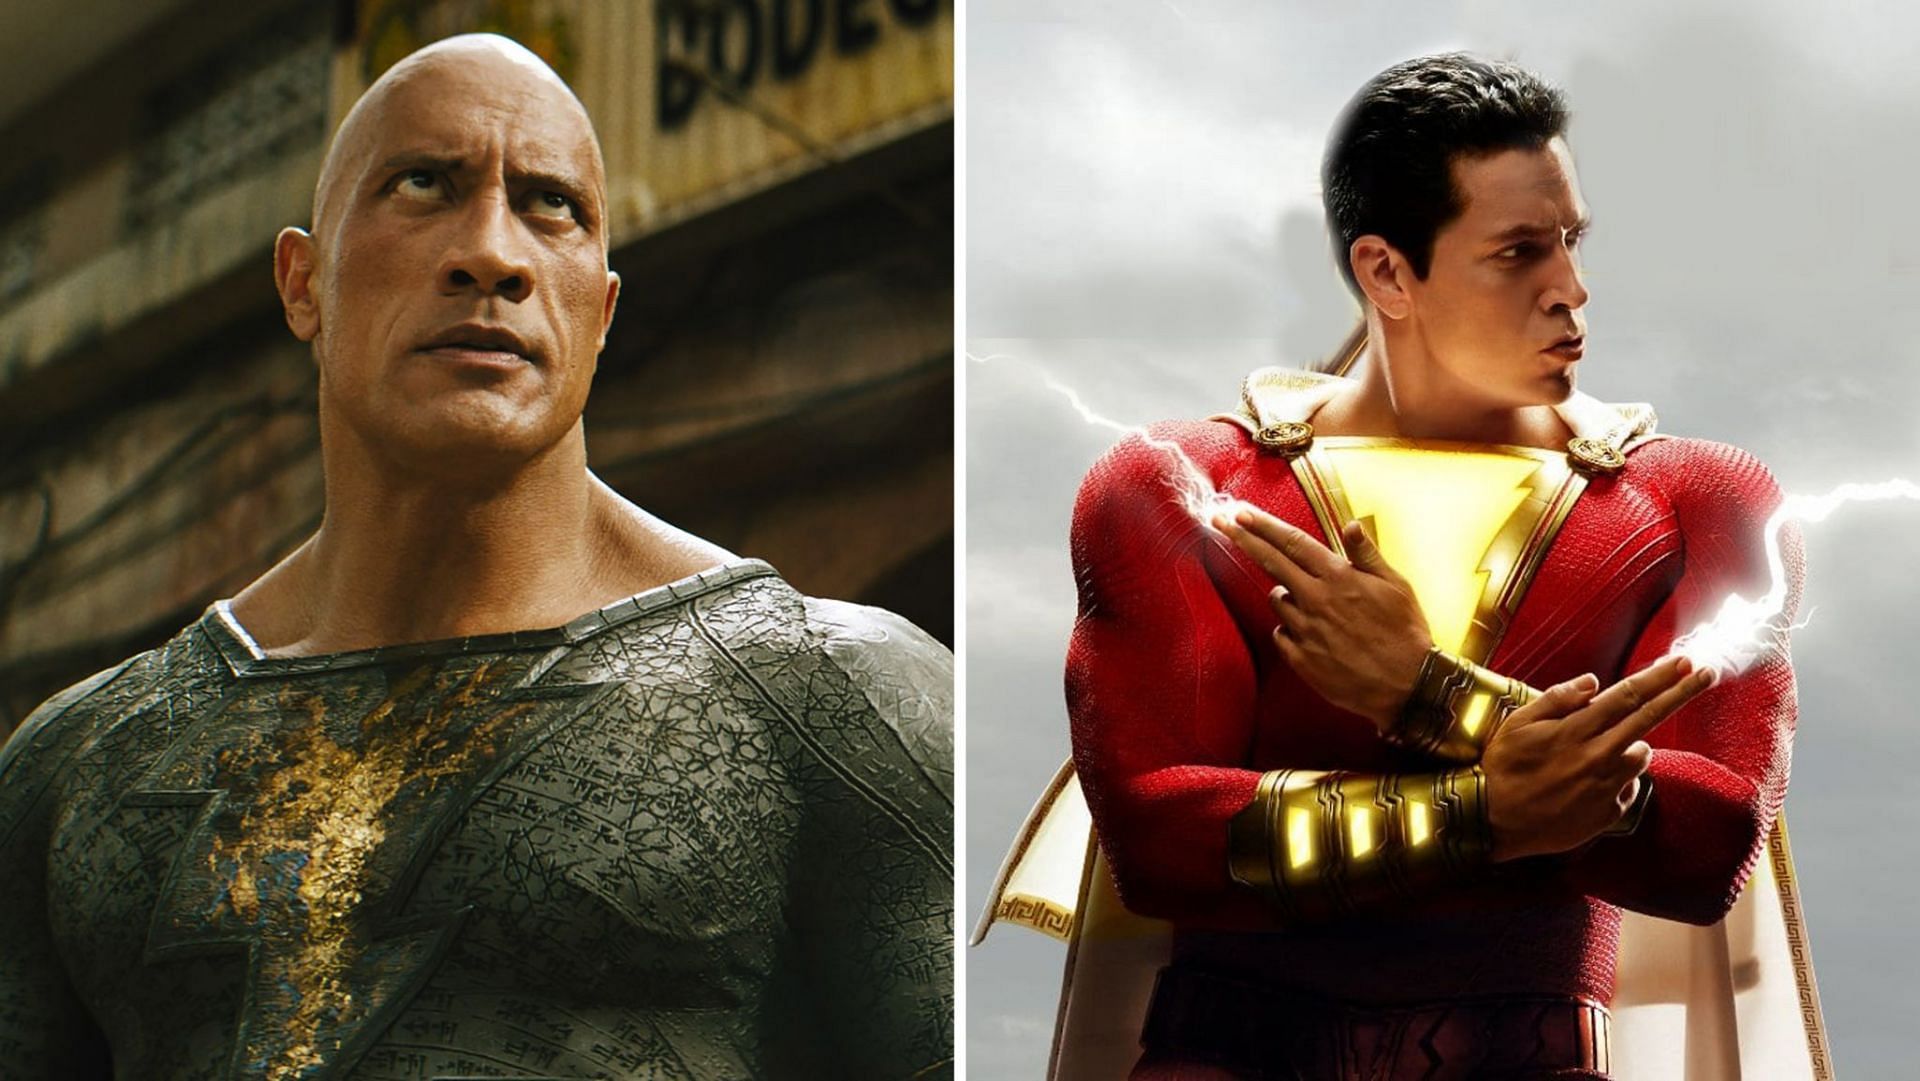 The lack of connection between Shazam and Black Adam, another DC character, may have contributed to the film&#039;s underperformance (Image via Sportskeeda)